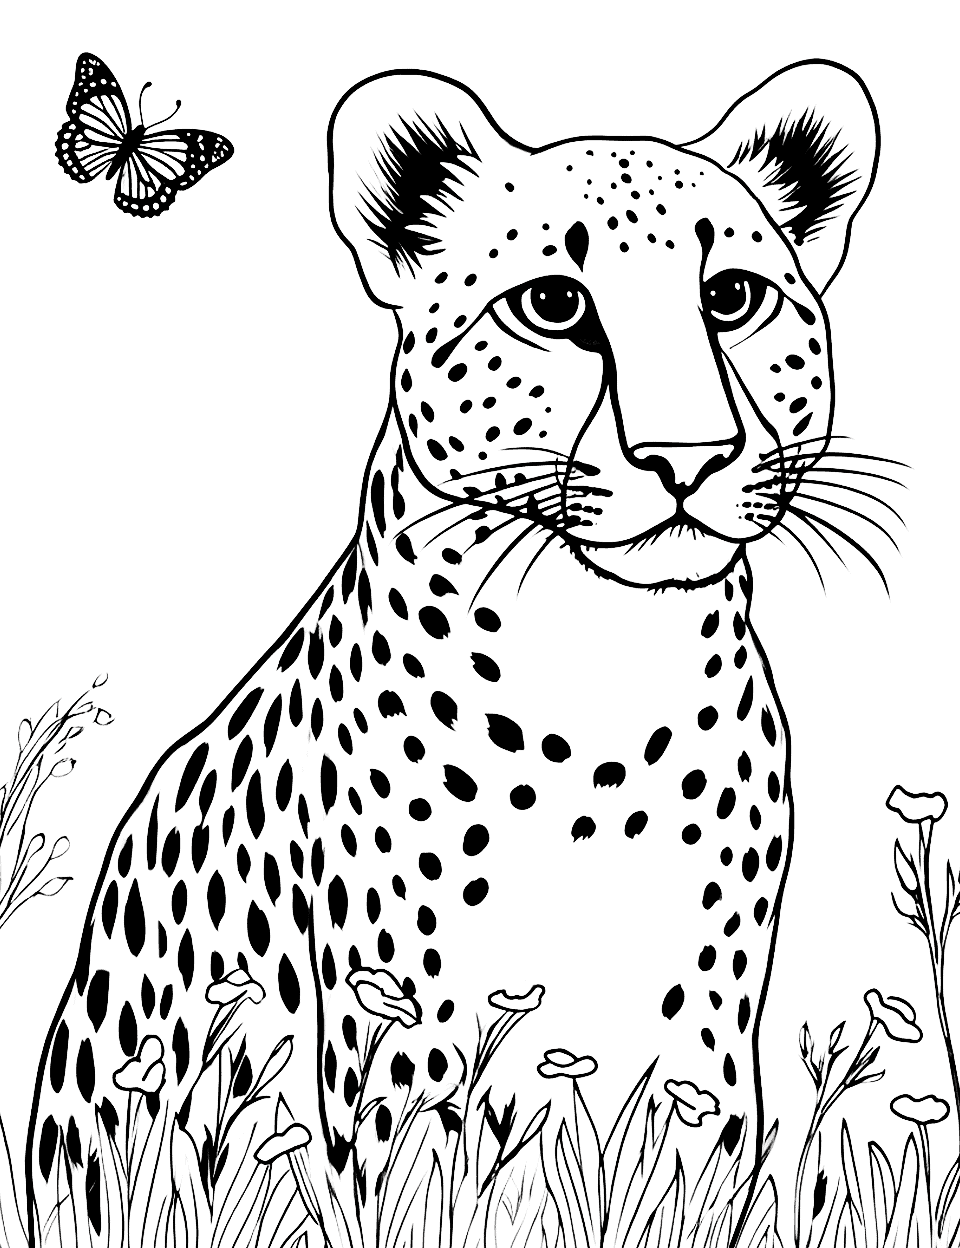 Cheetah with a Butterfly  Coloring Page - A whimsical scene of a cheetah with a butterfly flying around it.